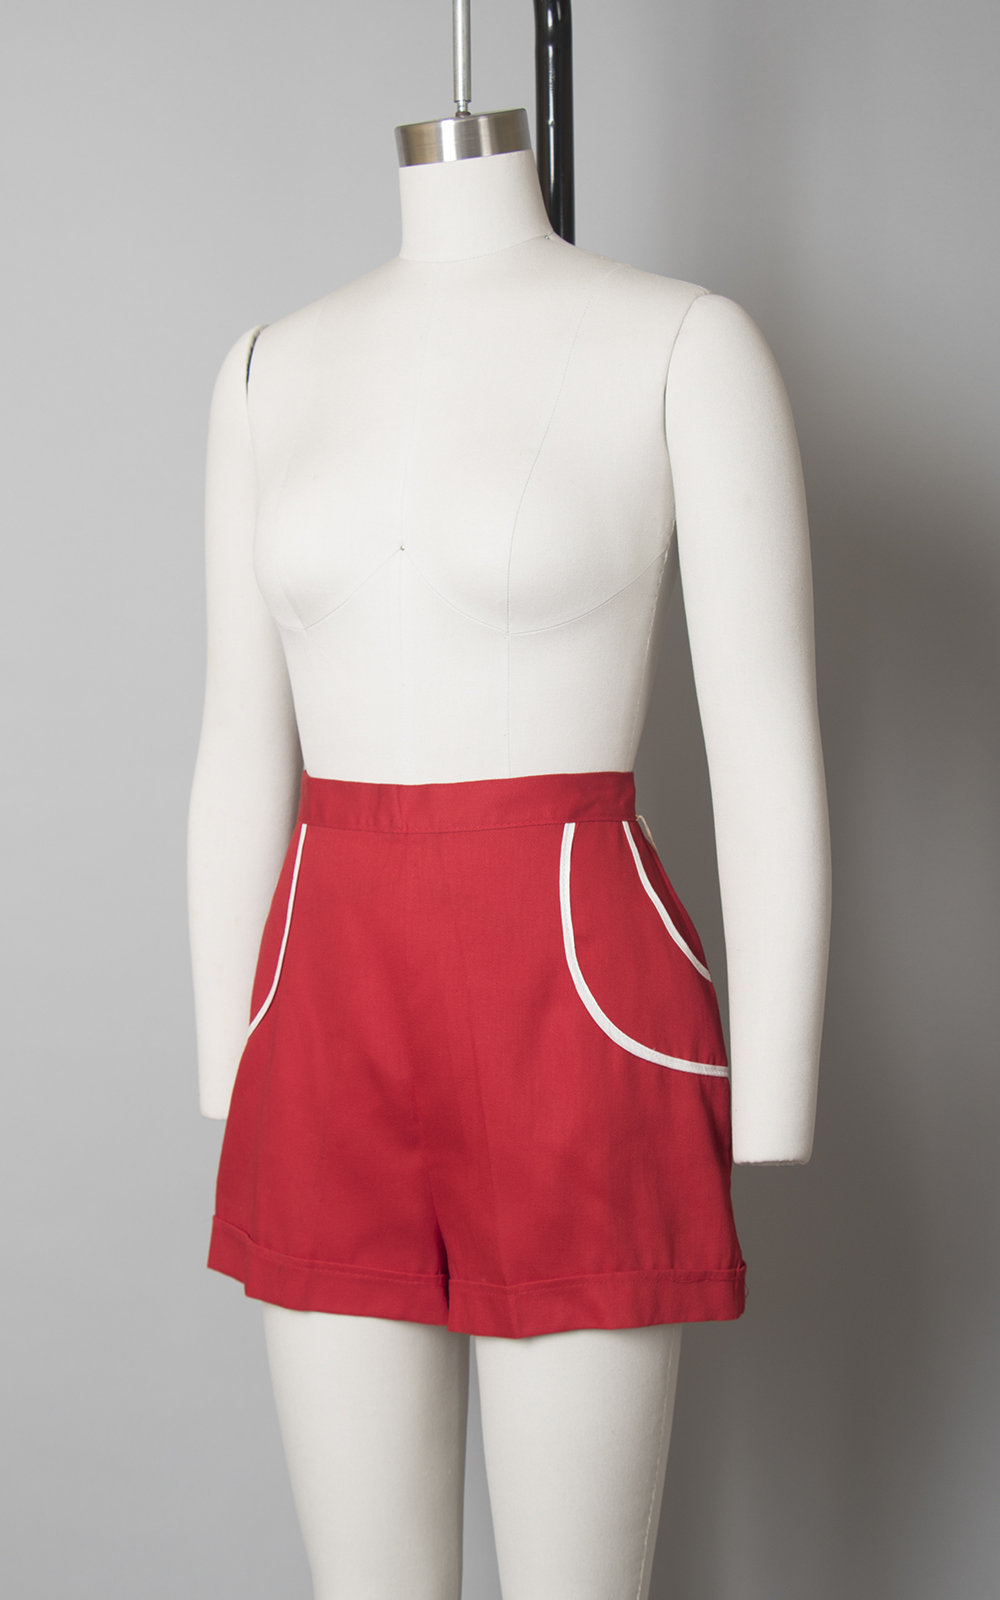 Vintage 1940s Shorts | 40s DEADSTOCK Red Cotton High Waisted Summer Sportswear Shorts w/ Pockets (small)